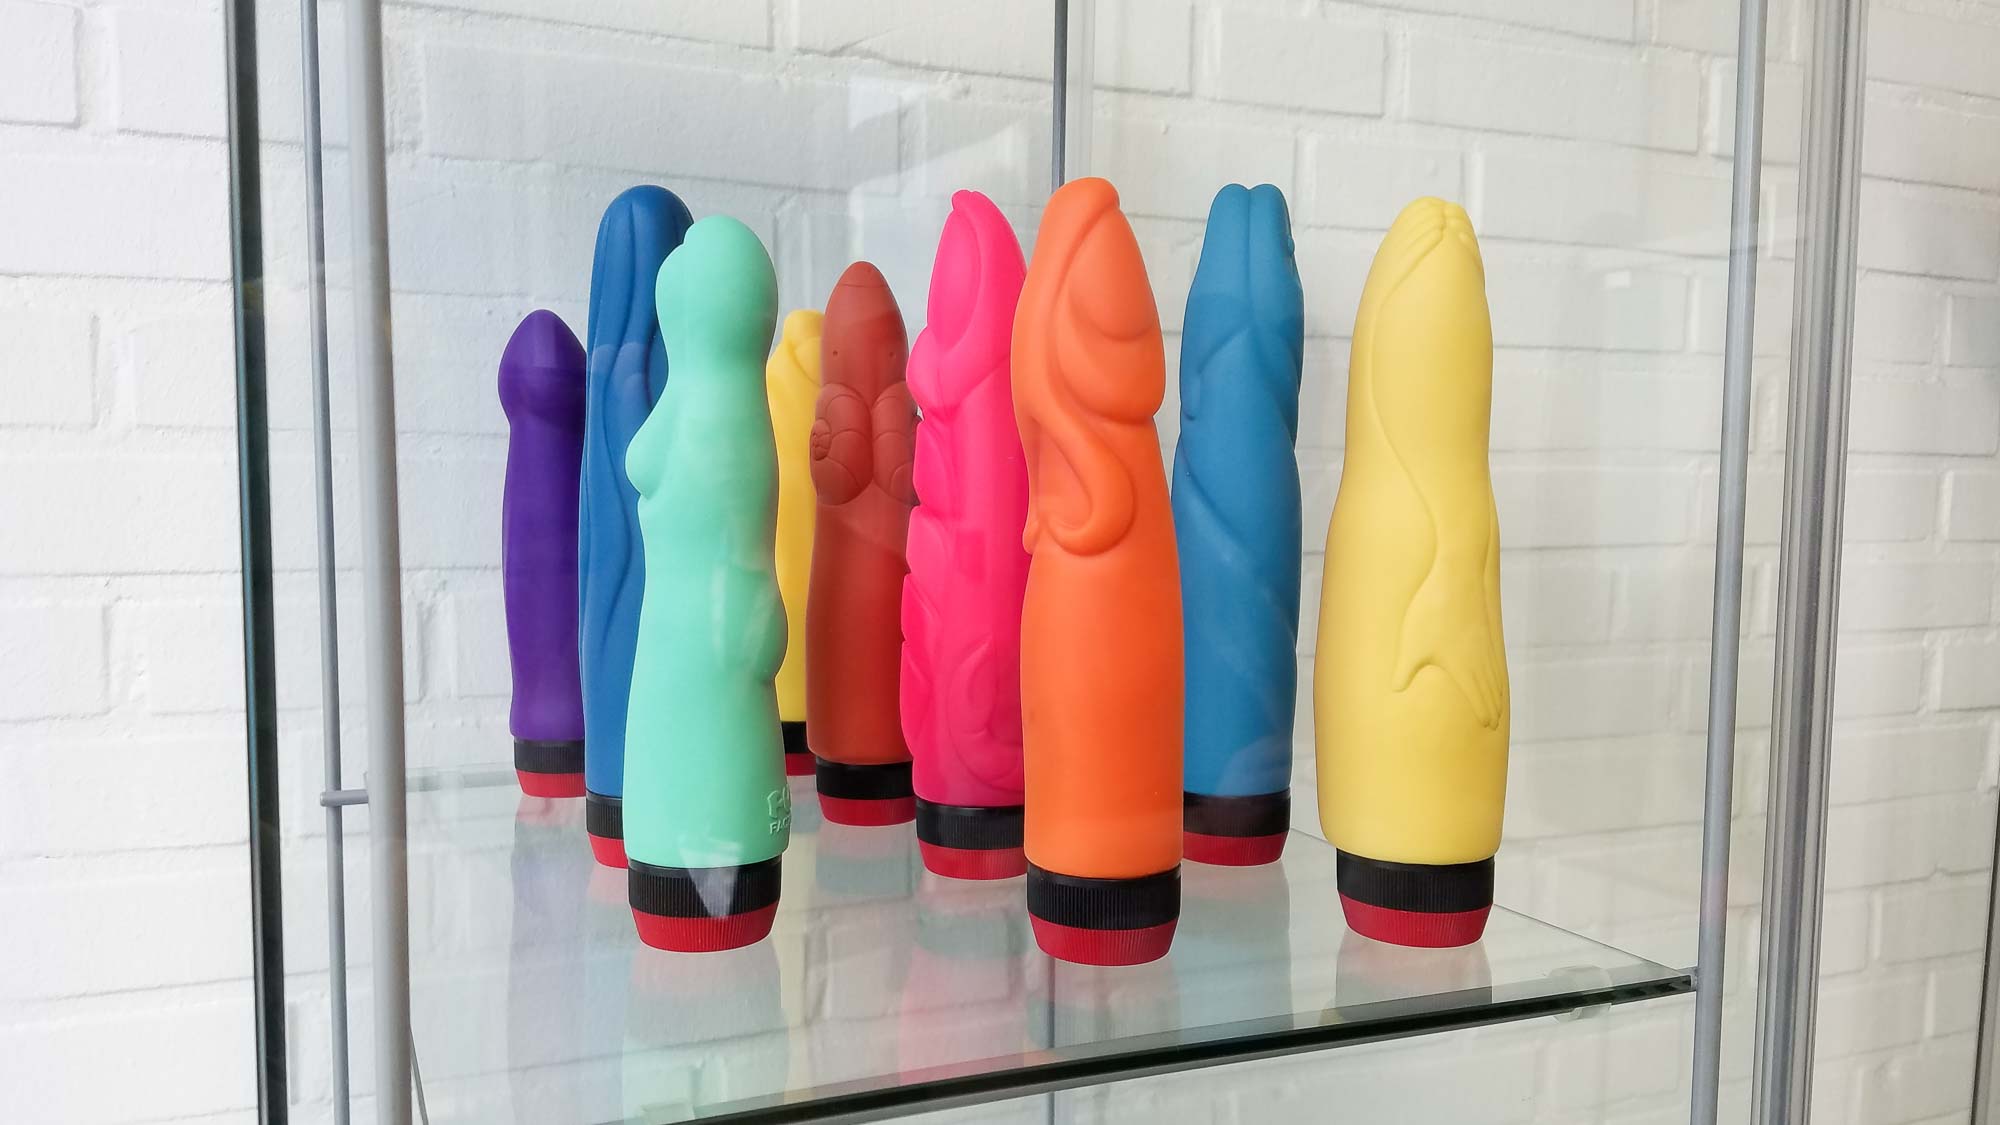 The Dildo Business Is Harder Than You Think